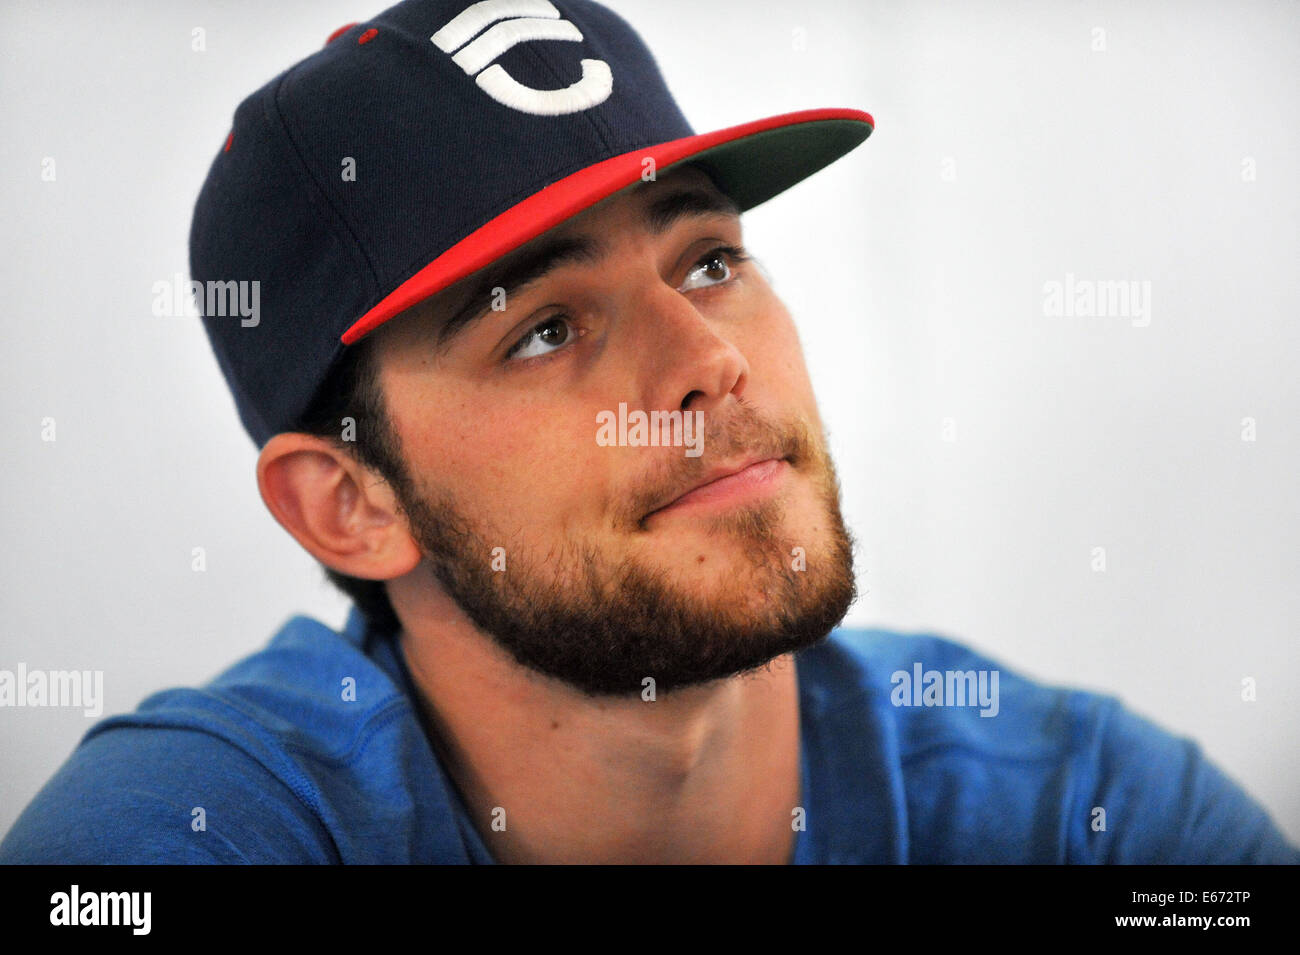 8,750 Tyler Seguin Photos & High Res Pictures - Getty Images